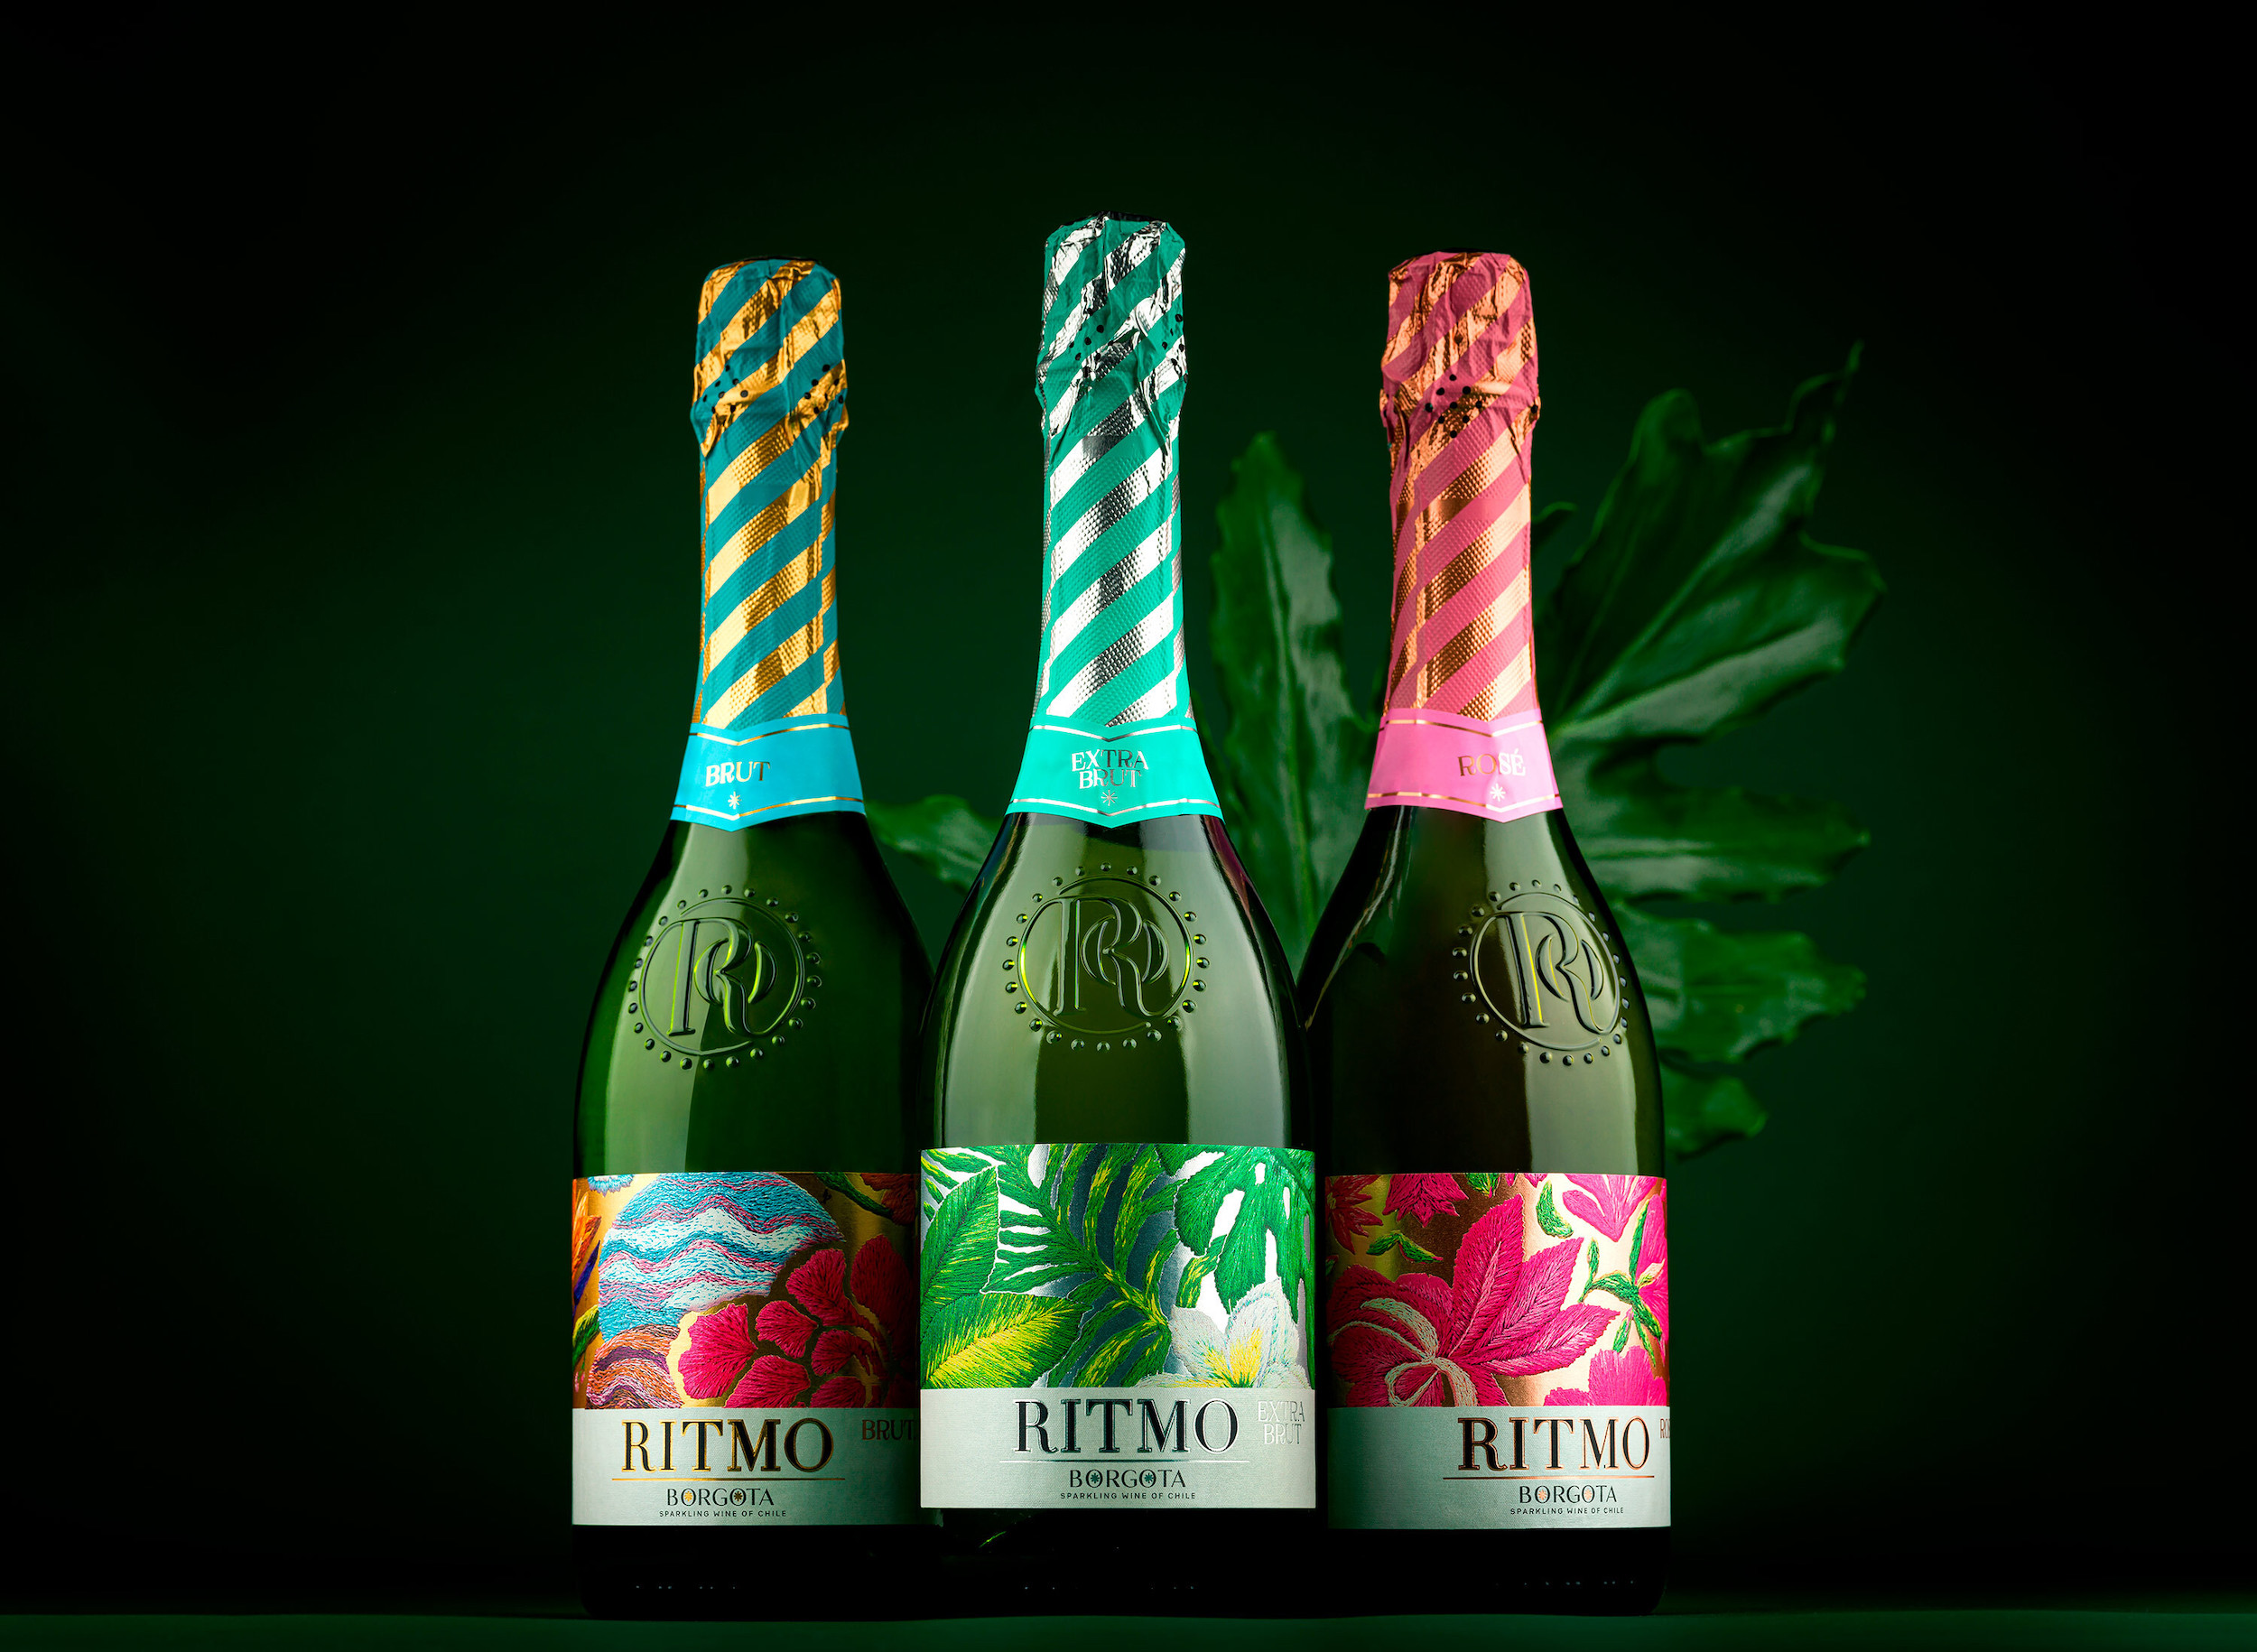 DAf Agency Creates a Sparkling Wine Packaging Design that Encompass the Spirit and Vibrancy of Latin America